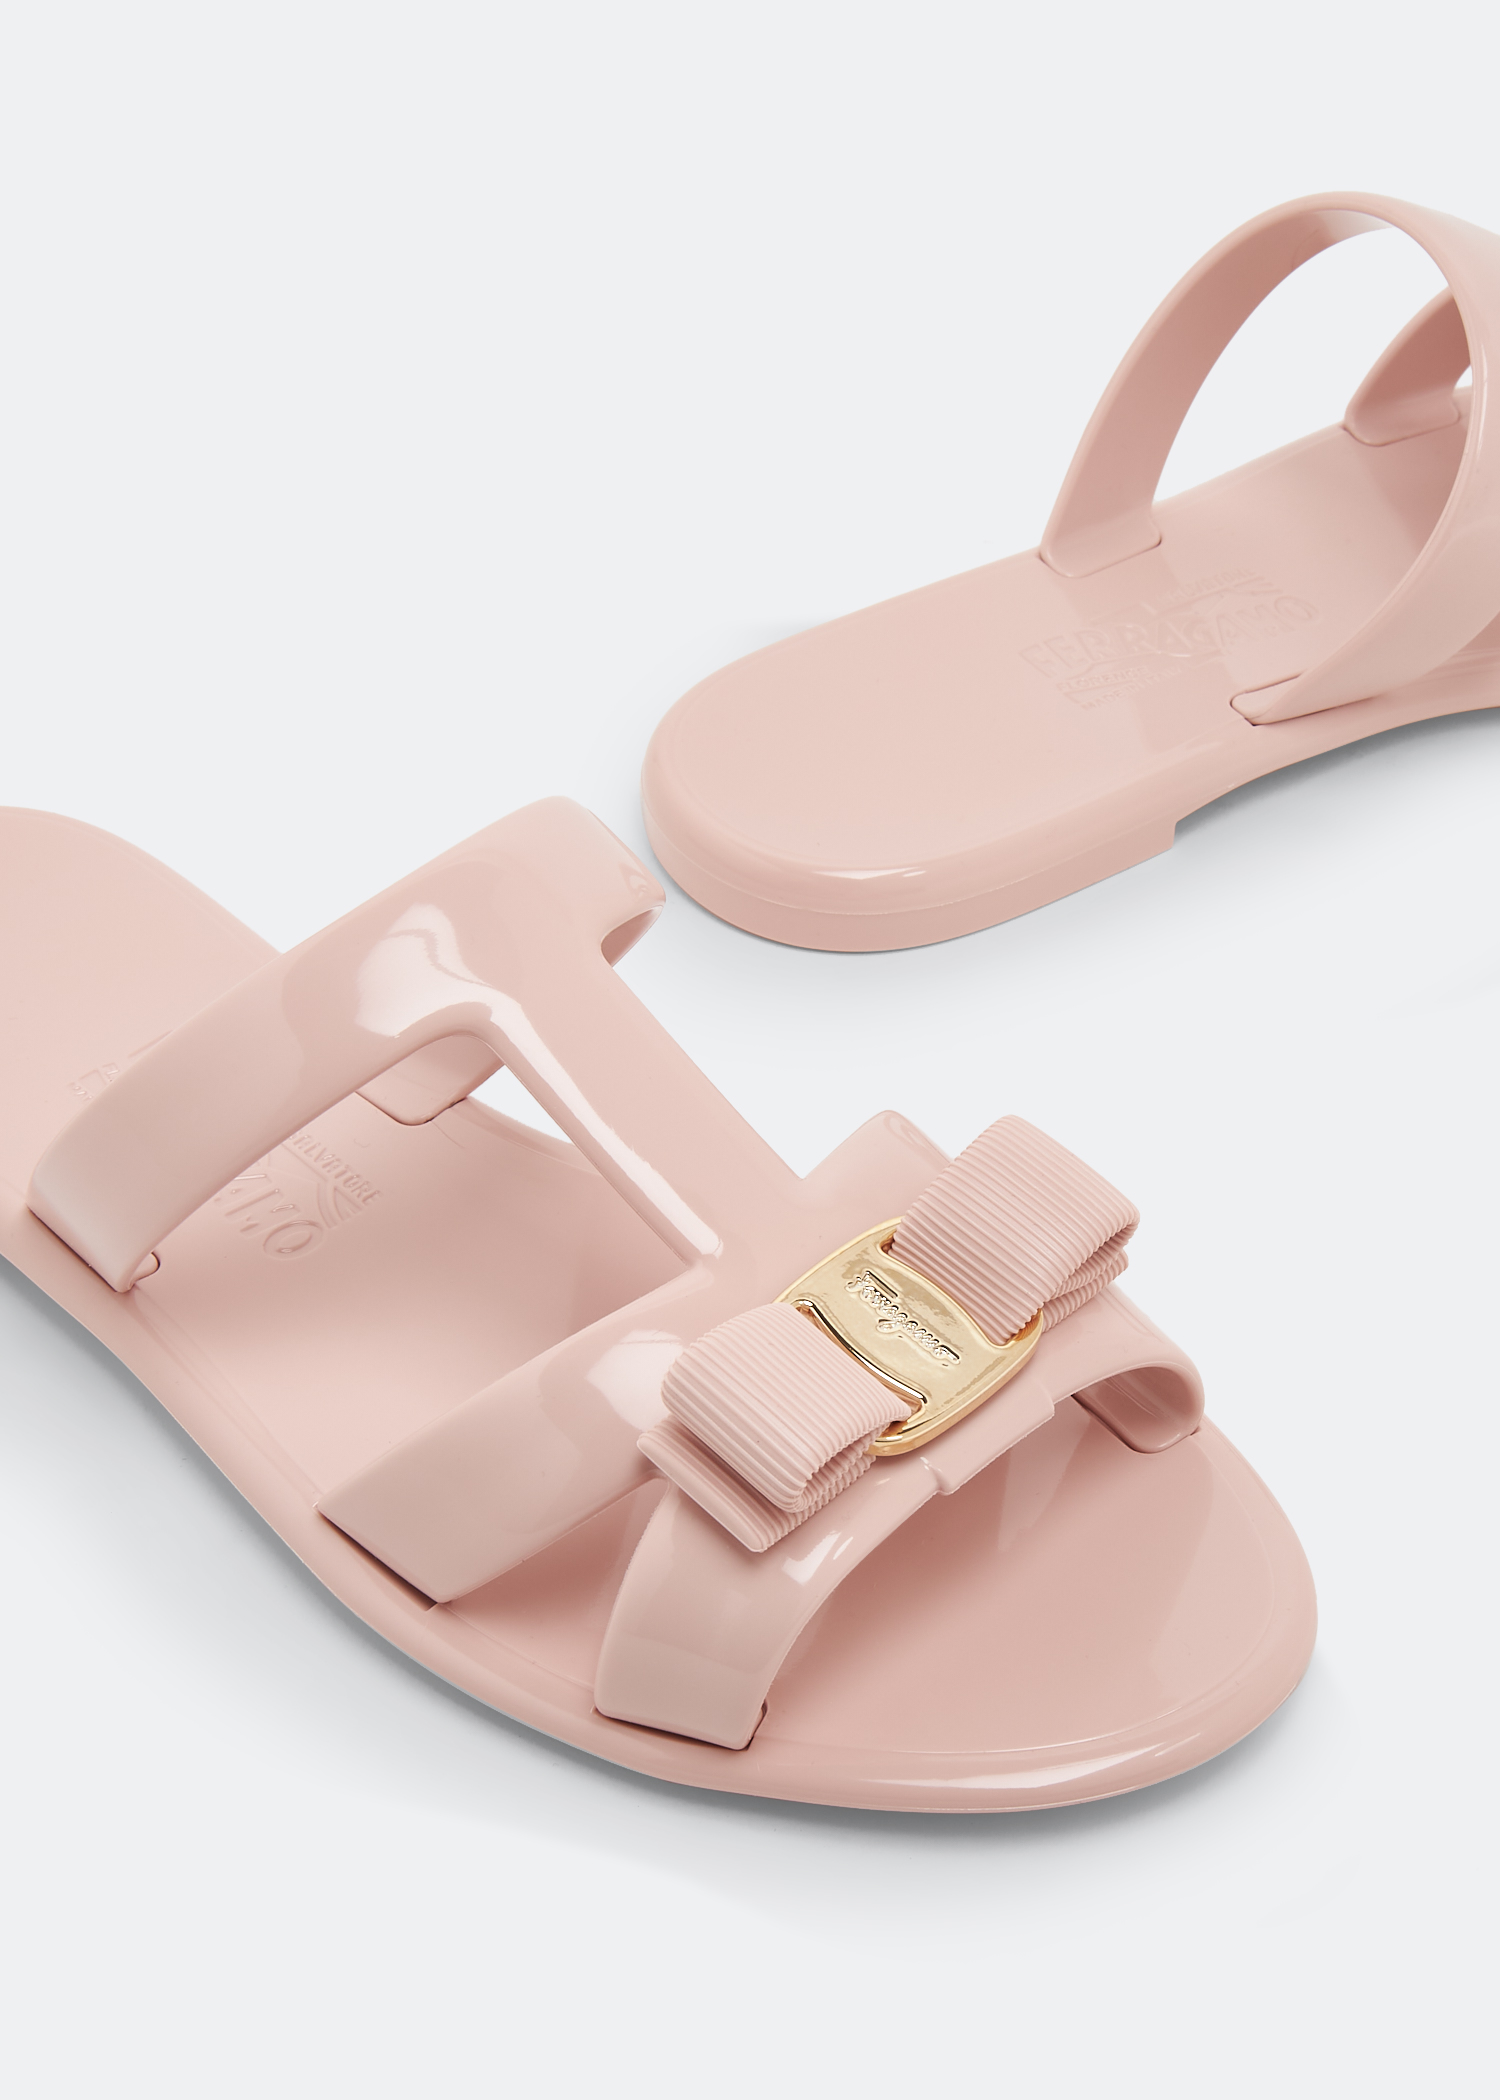 Ferragamo Jelly sandals for Women - Pink in UAE | Level Shoes